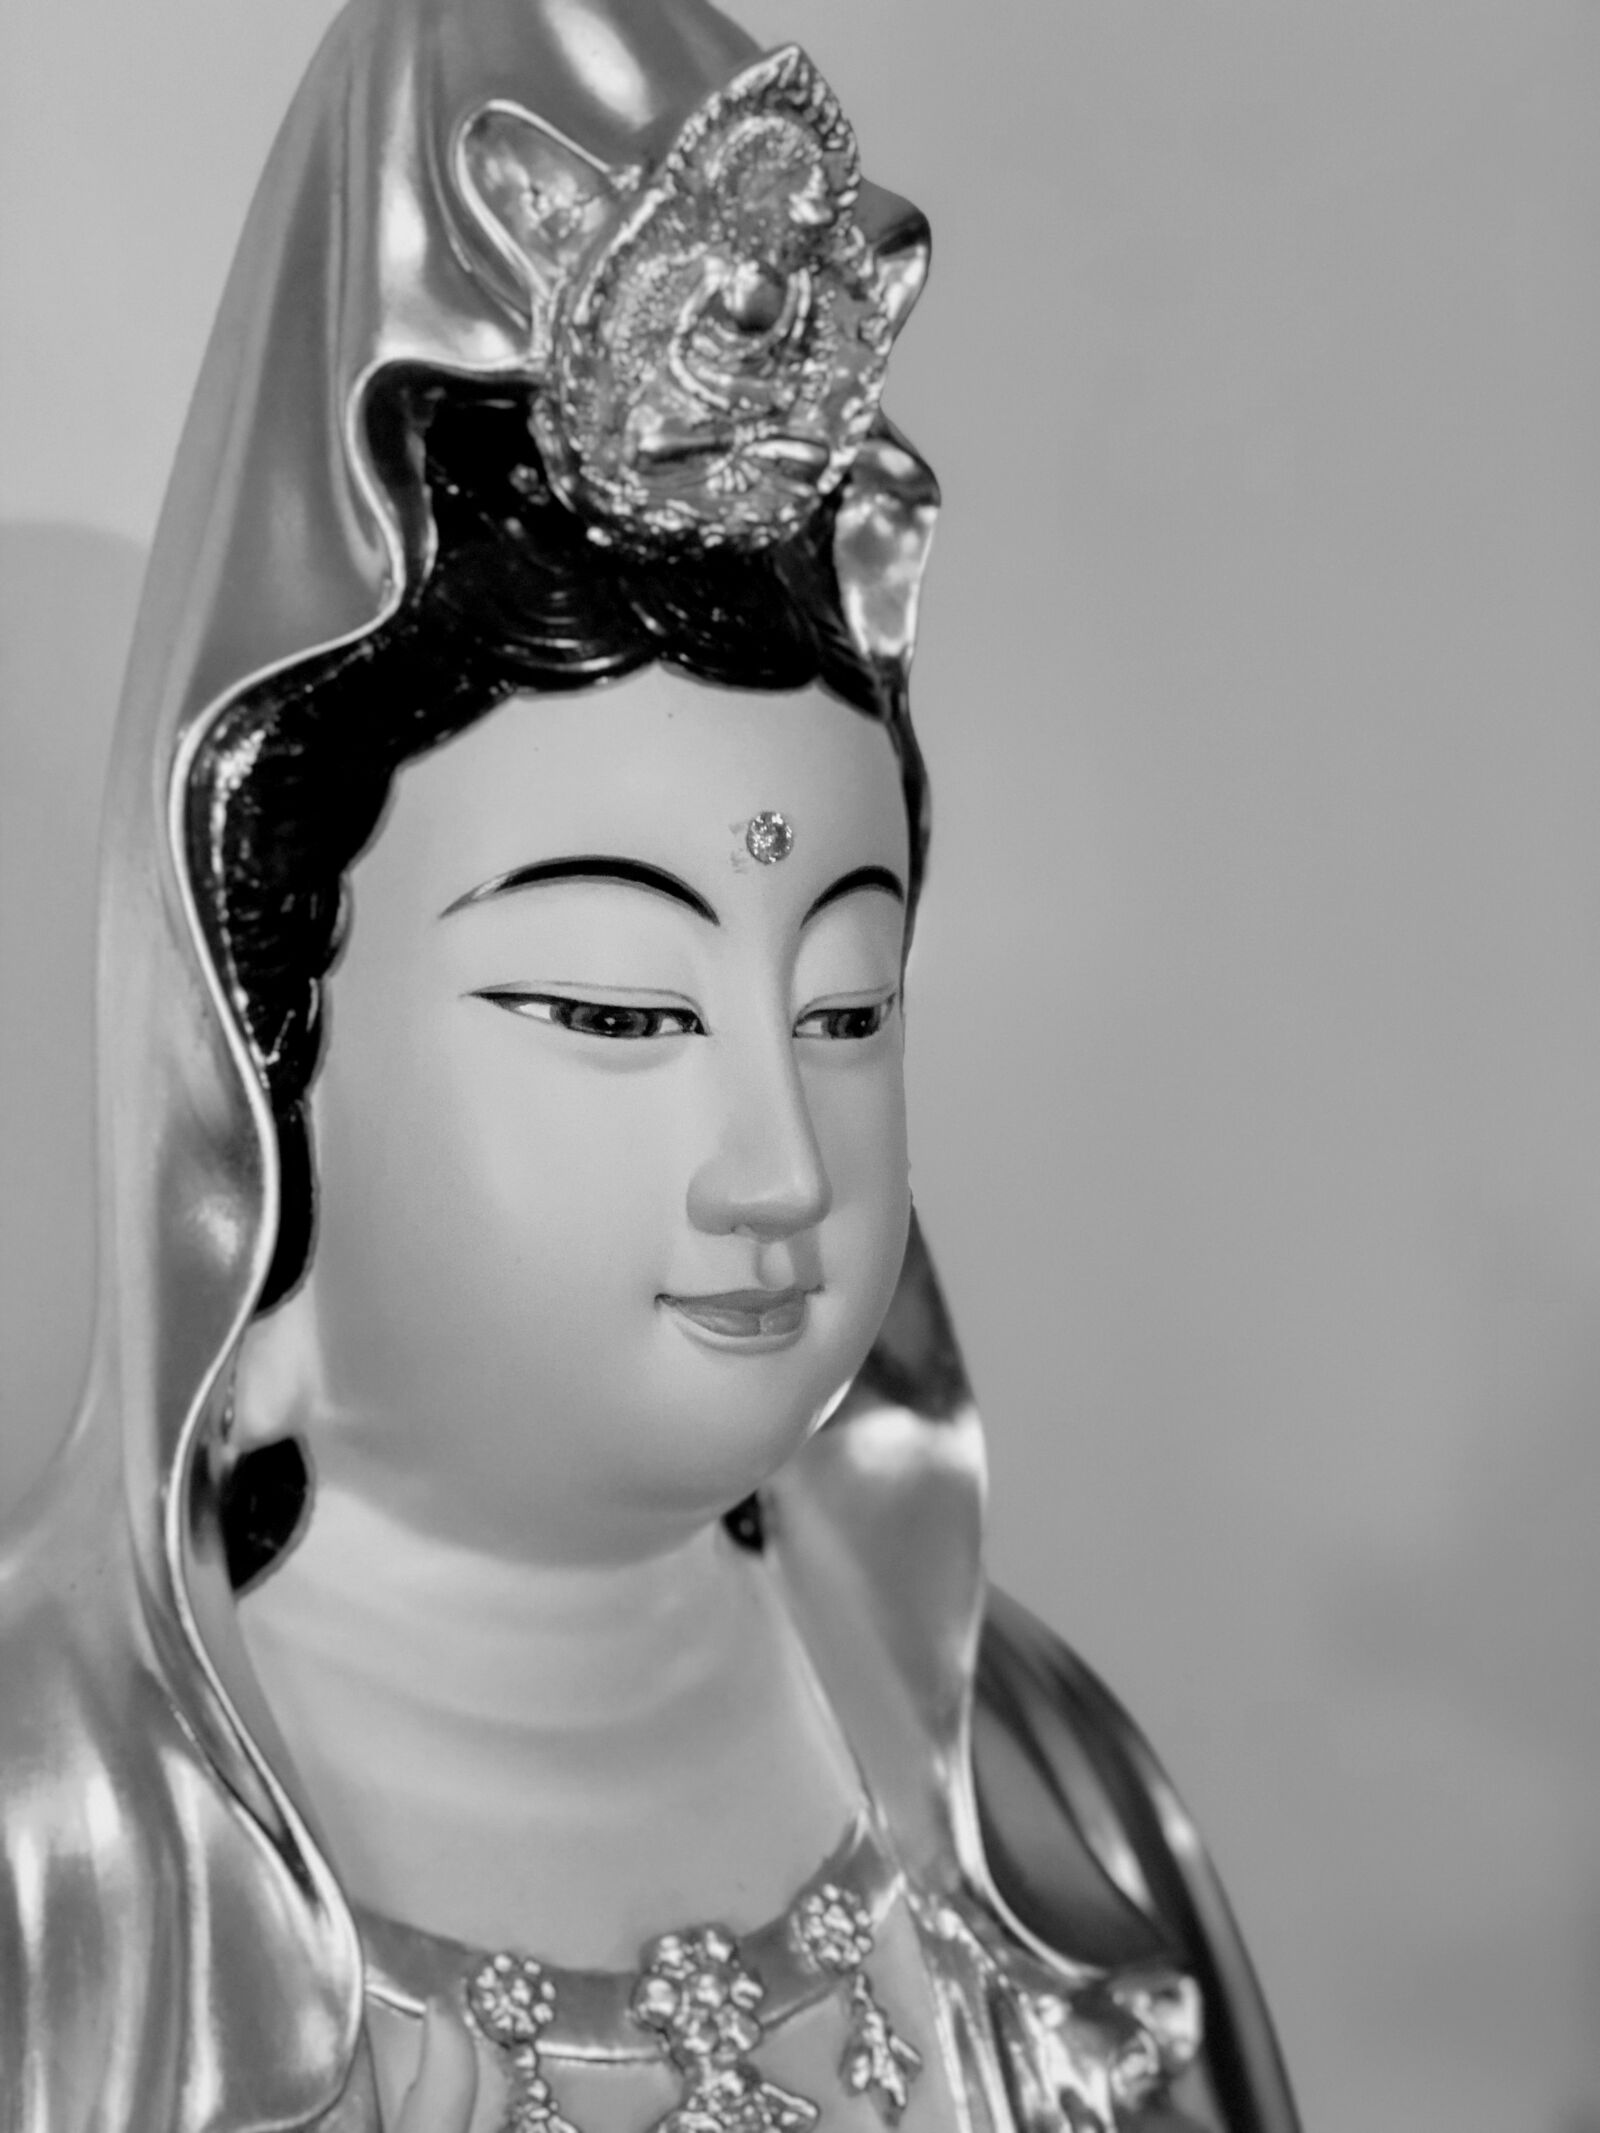 Apple iPhone 8 Plus sample photo. Guanyin, a kindly face photography